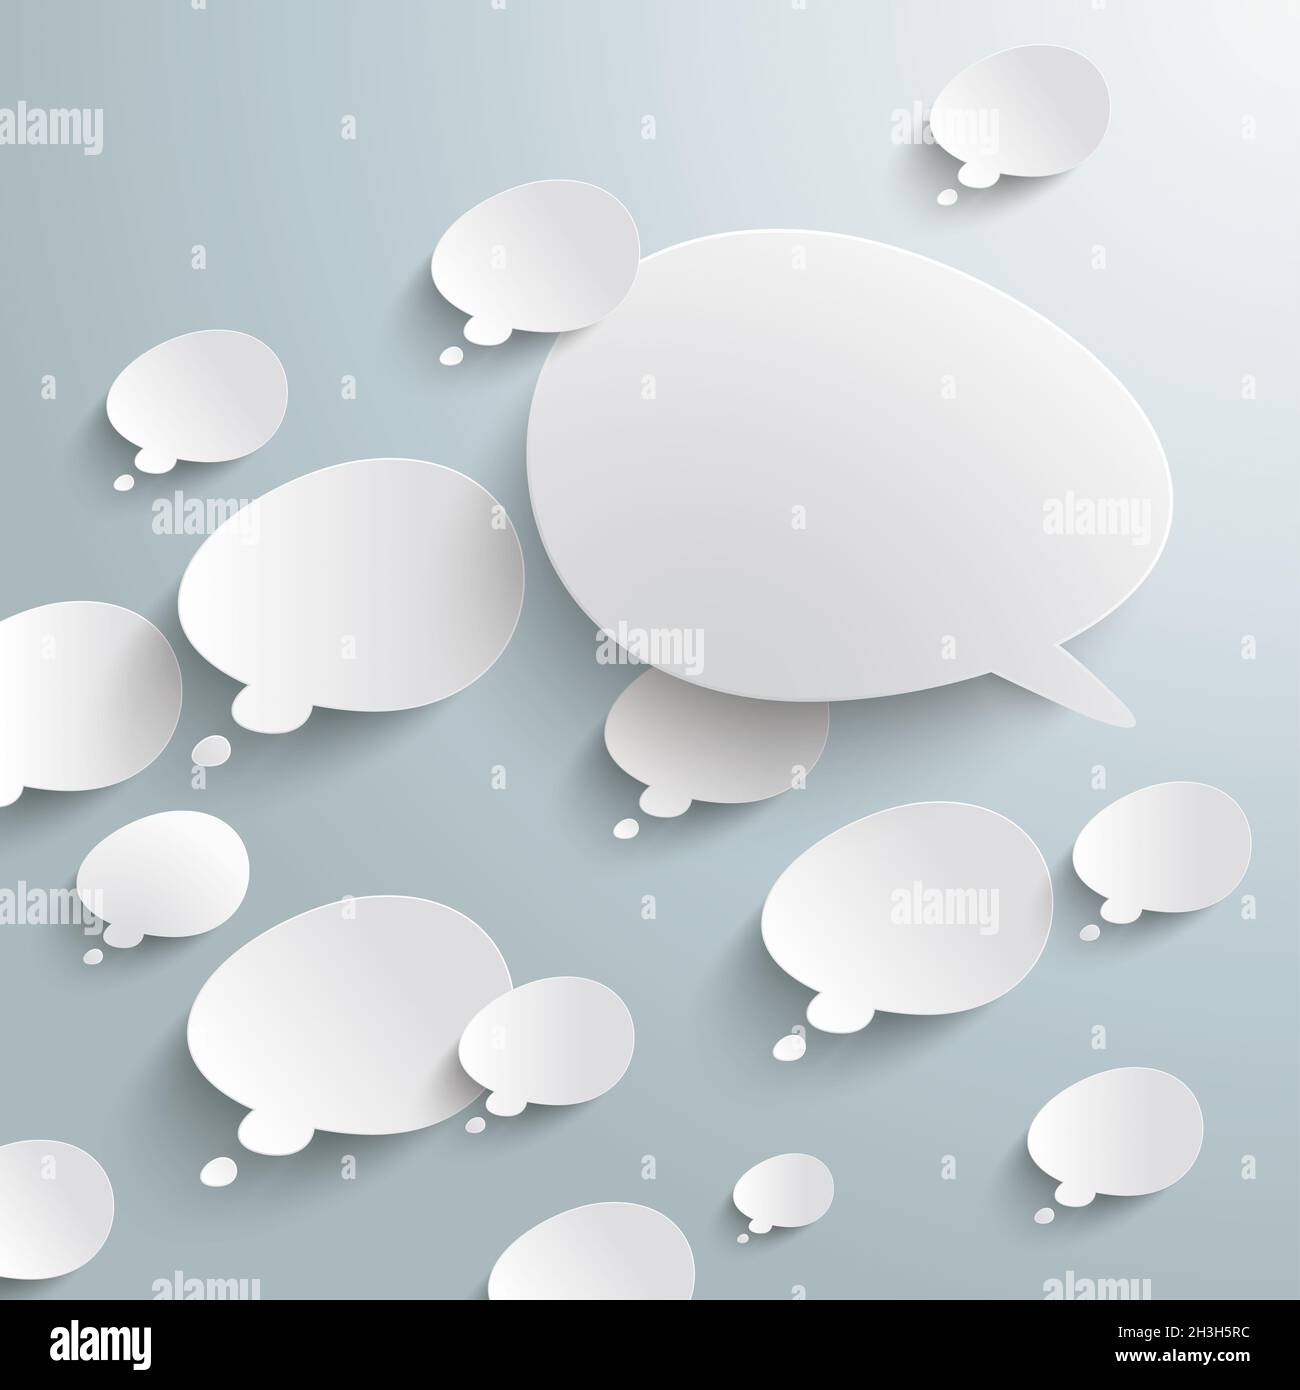 Bevel Speech And Thought Bubbles Opposing View Stock Photo